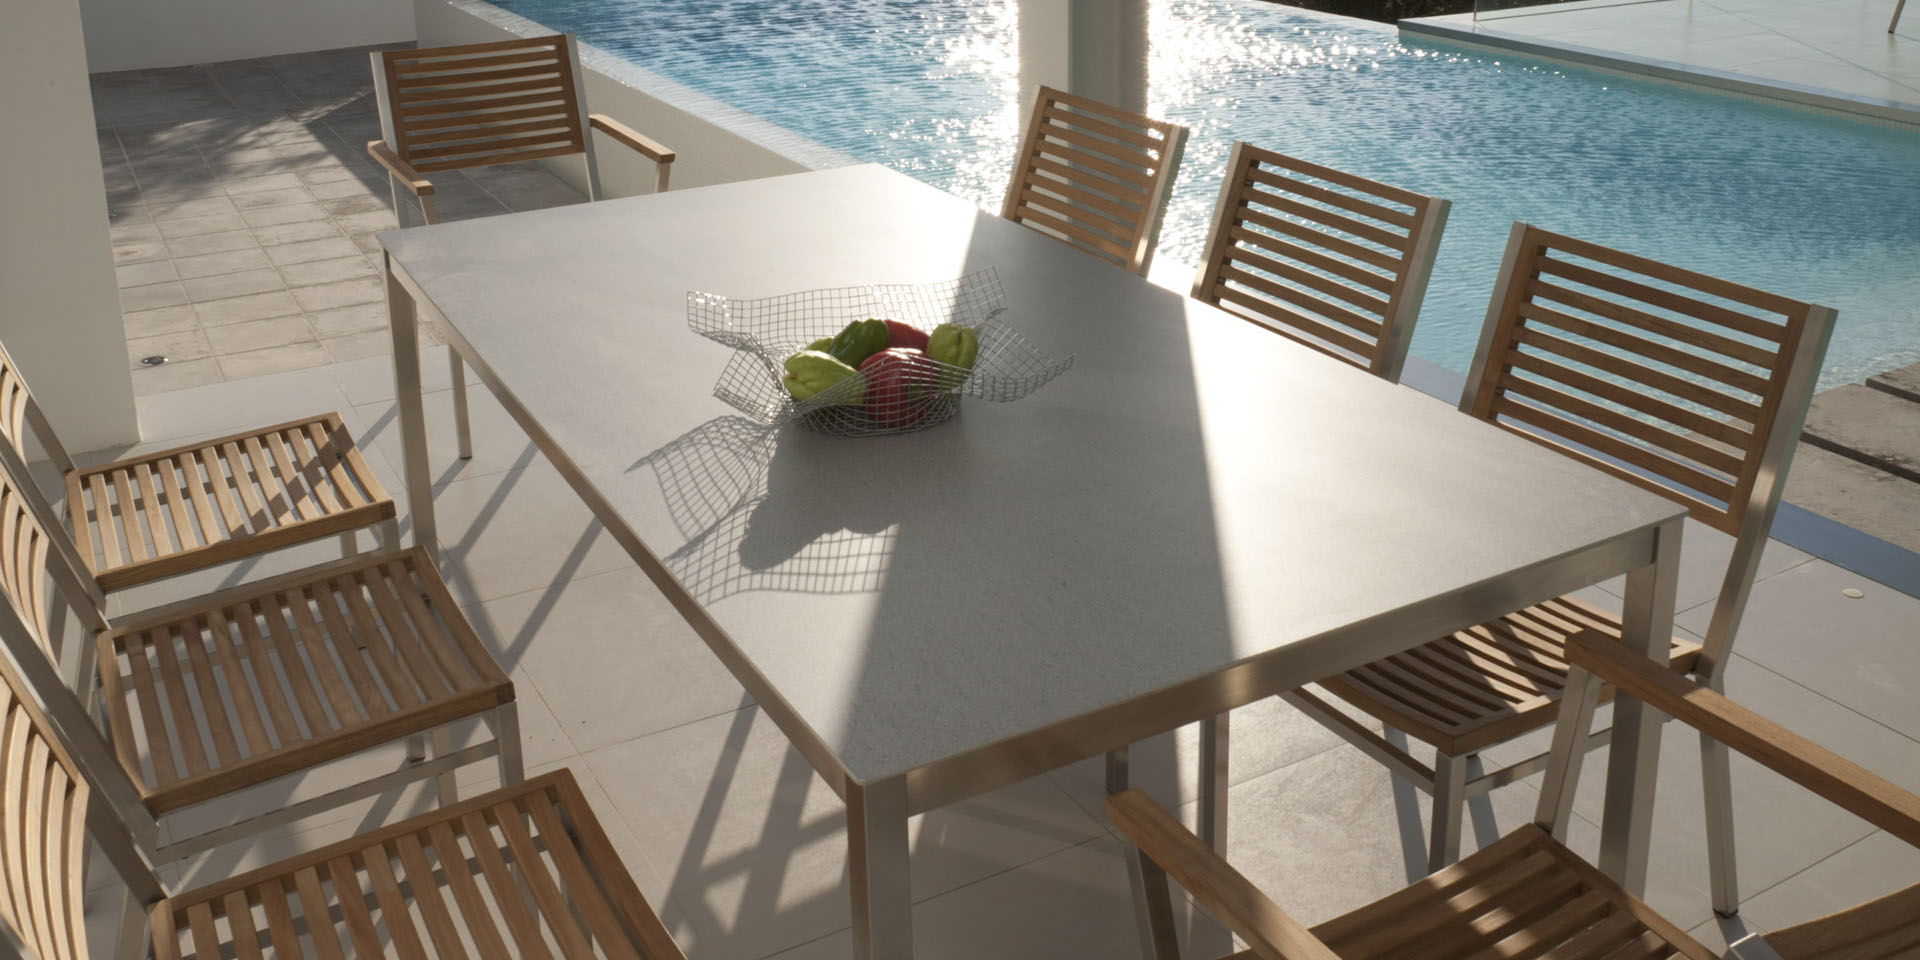 Equinox Dining Table 100 Square - Powder coated